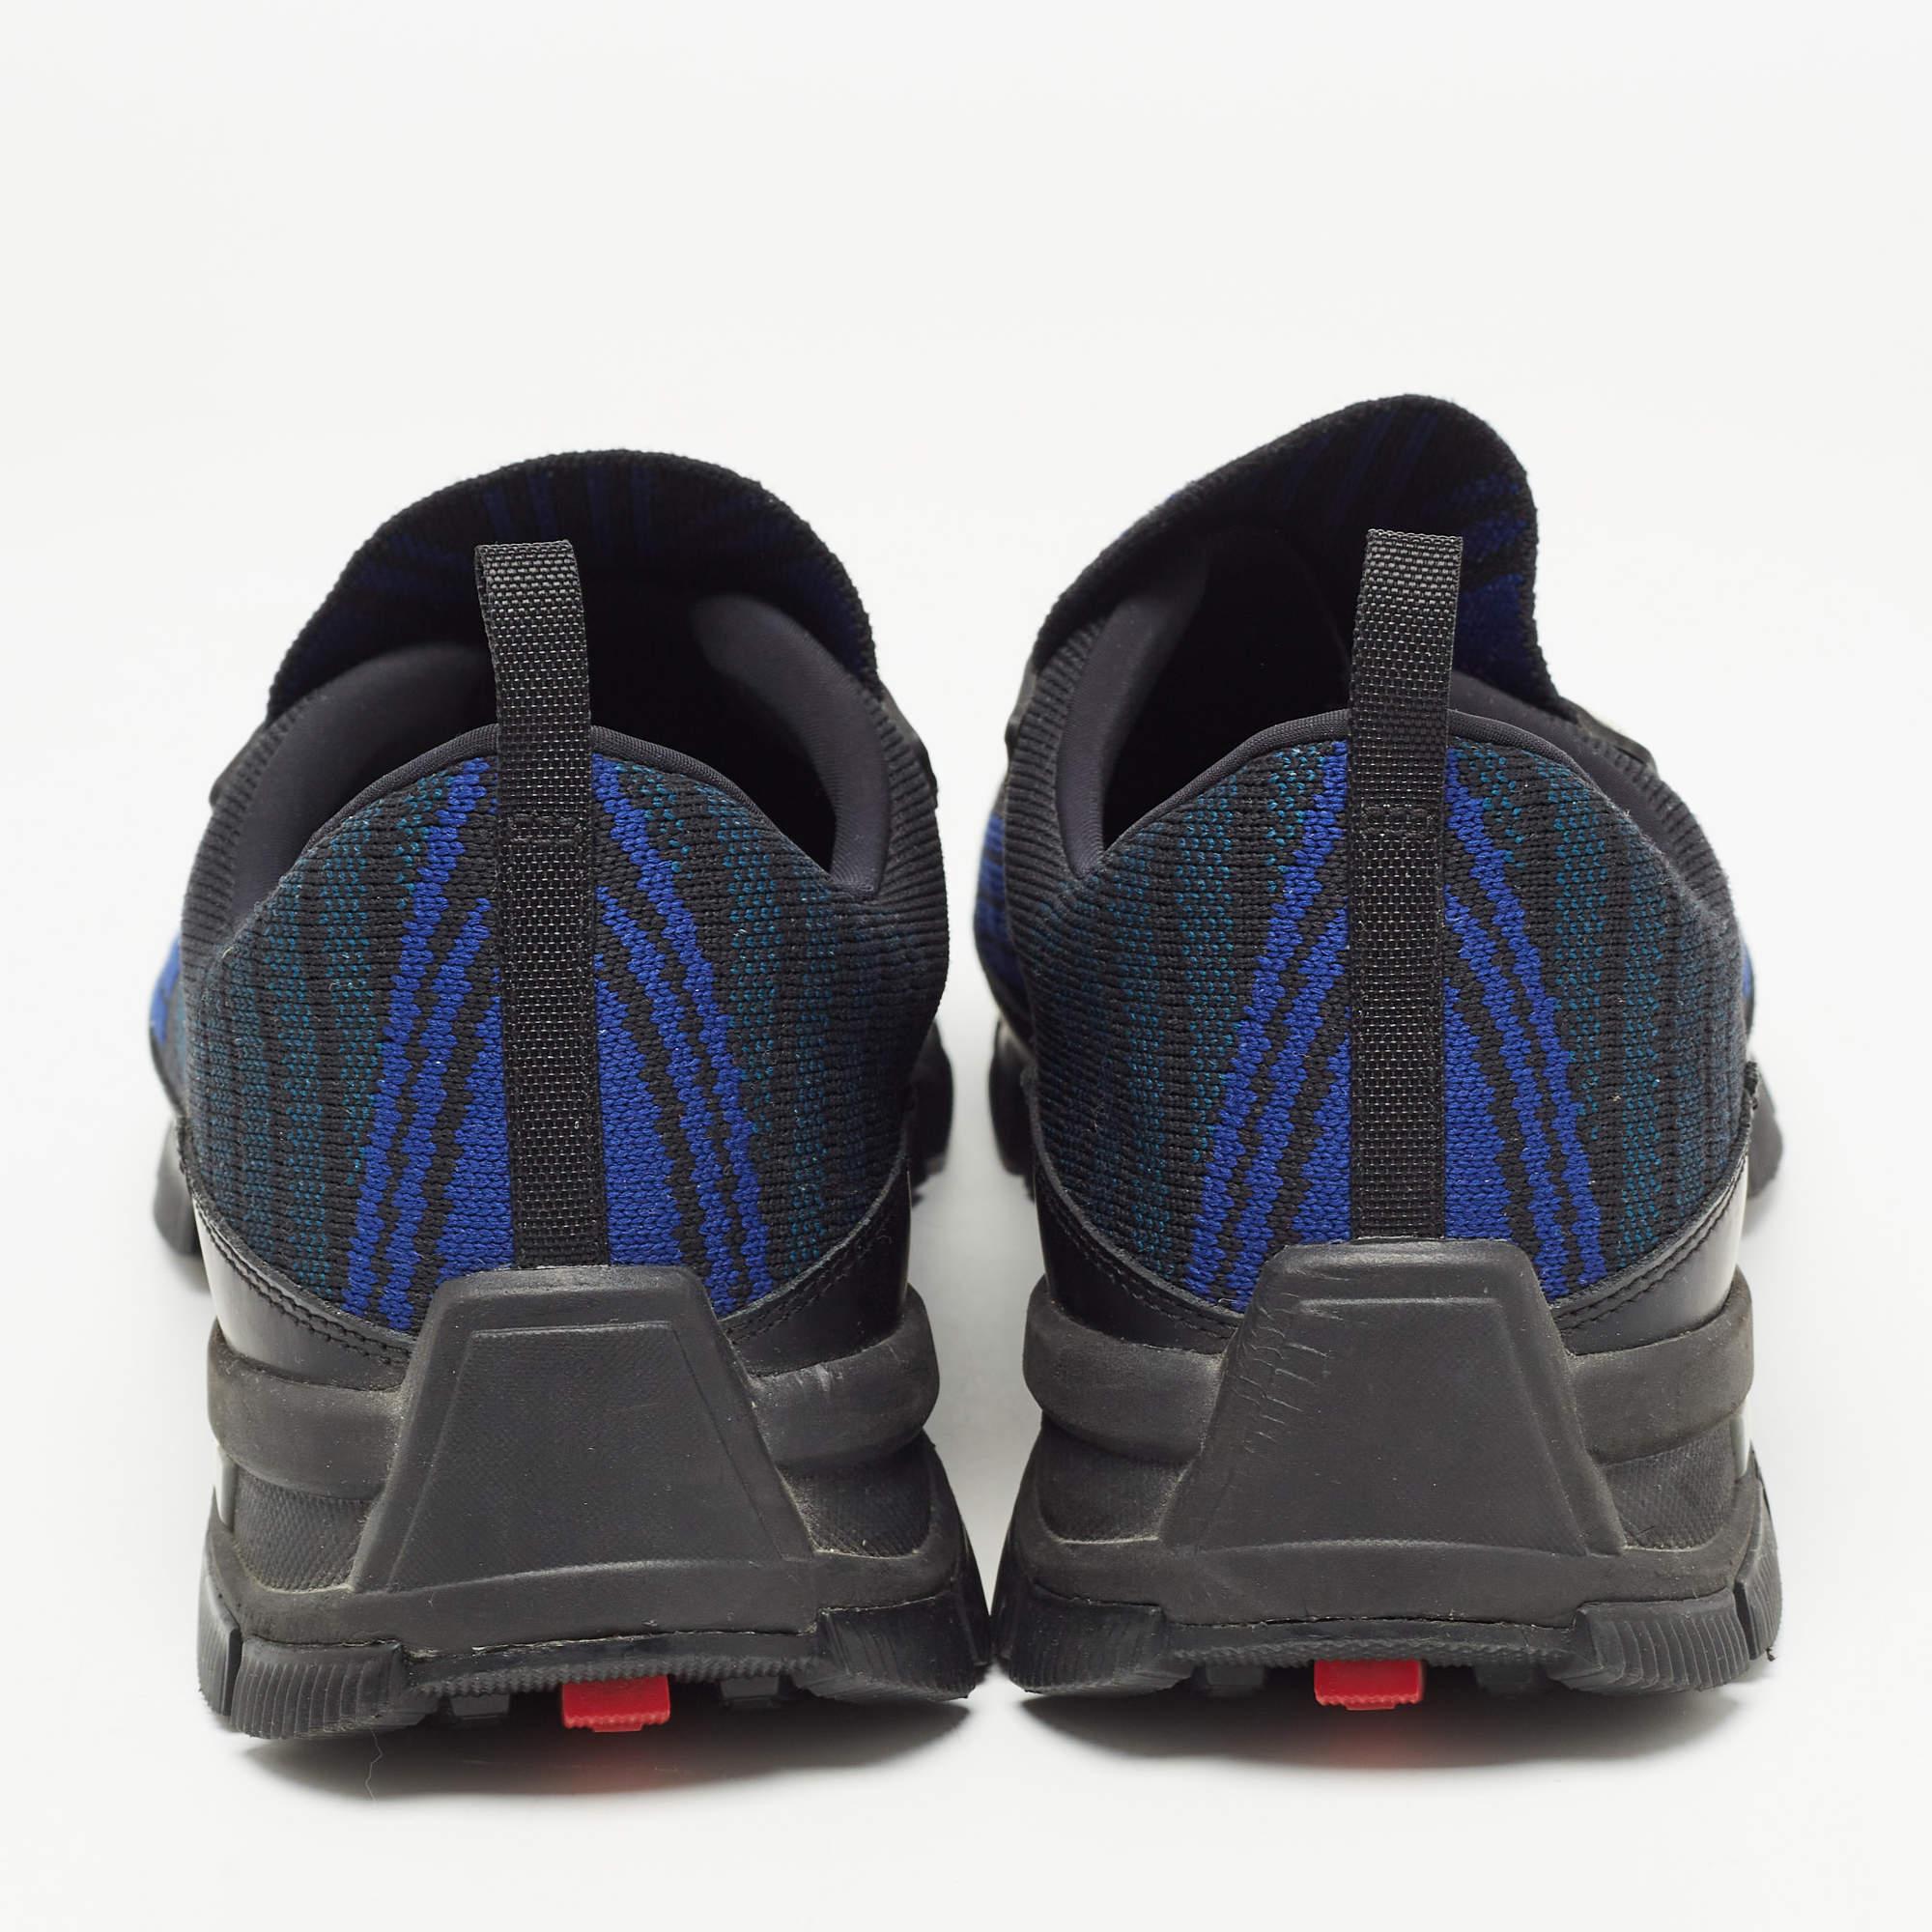 Prada Black/Blue Knit Fabric Low Top Sneakers Size 42.5 For Sale 2